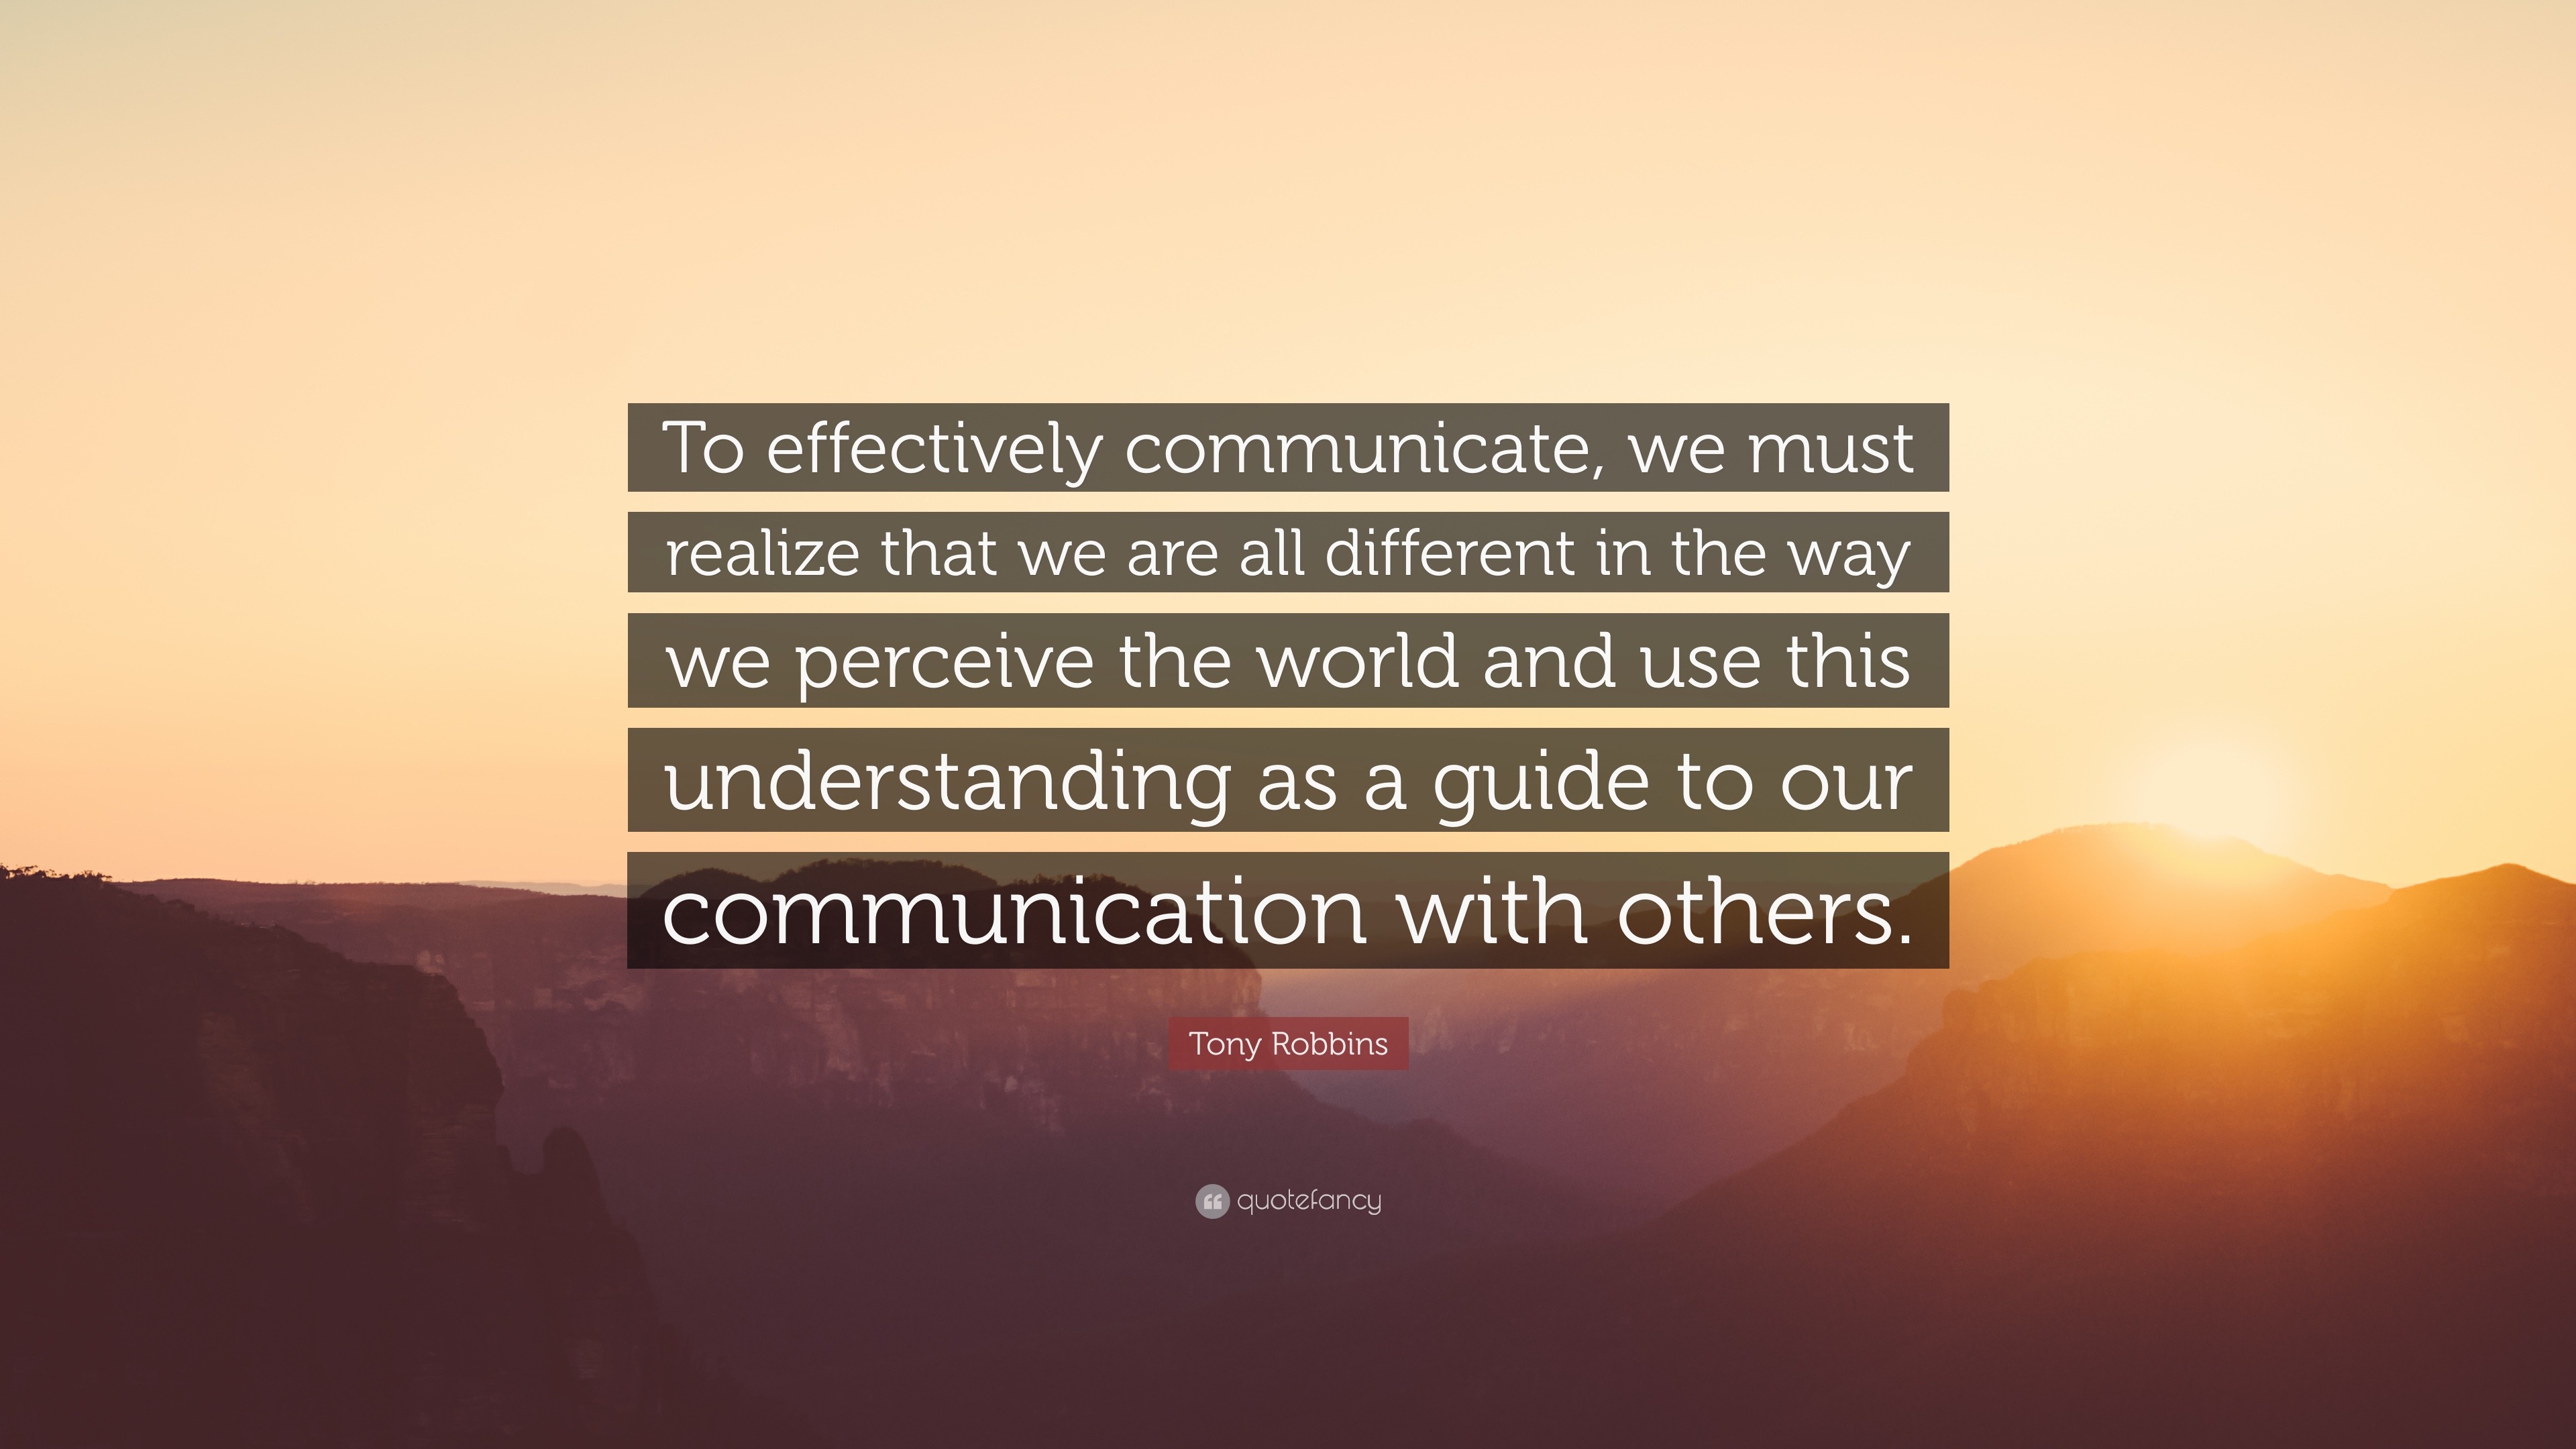 Tony Robbins Quote: “To effectively communicate, we must realize that